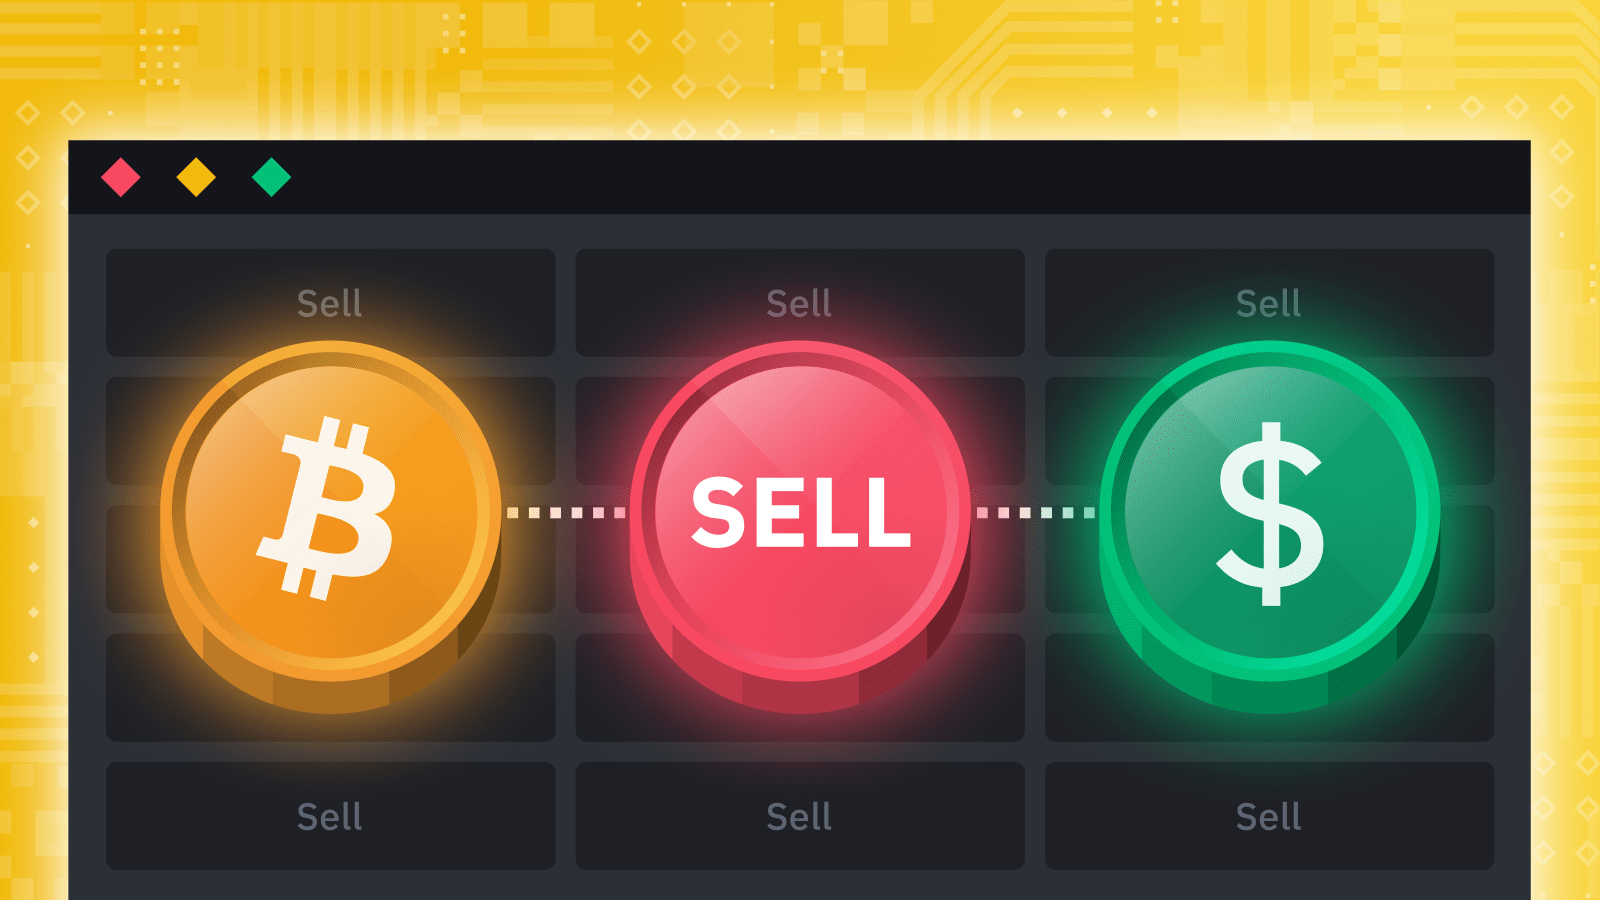 Bitcoin Price & Historical Charts: Is It Time To Buy Or Sell? - bitcoinhelp.fun